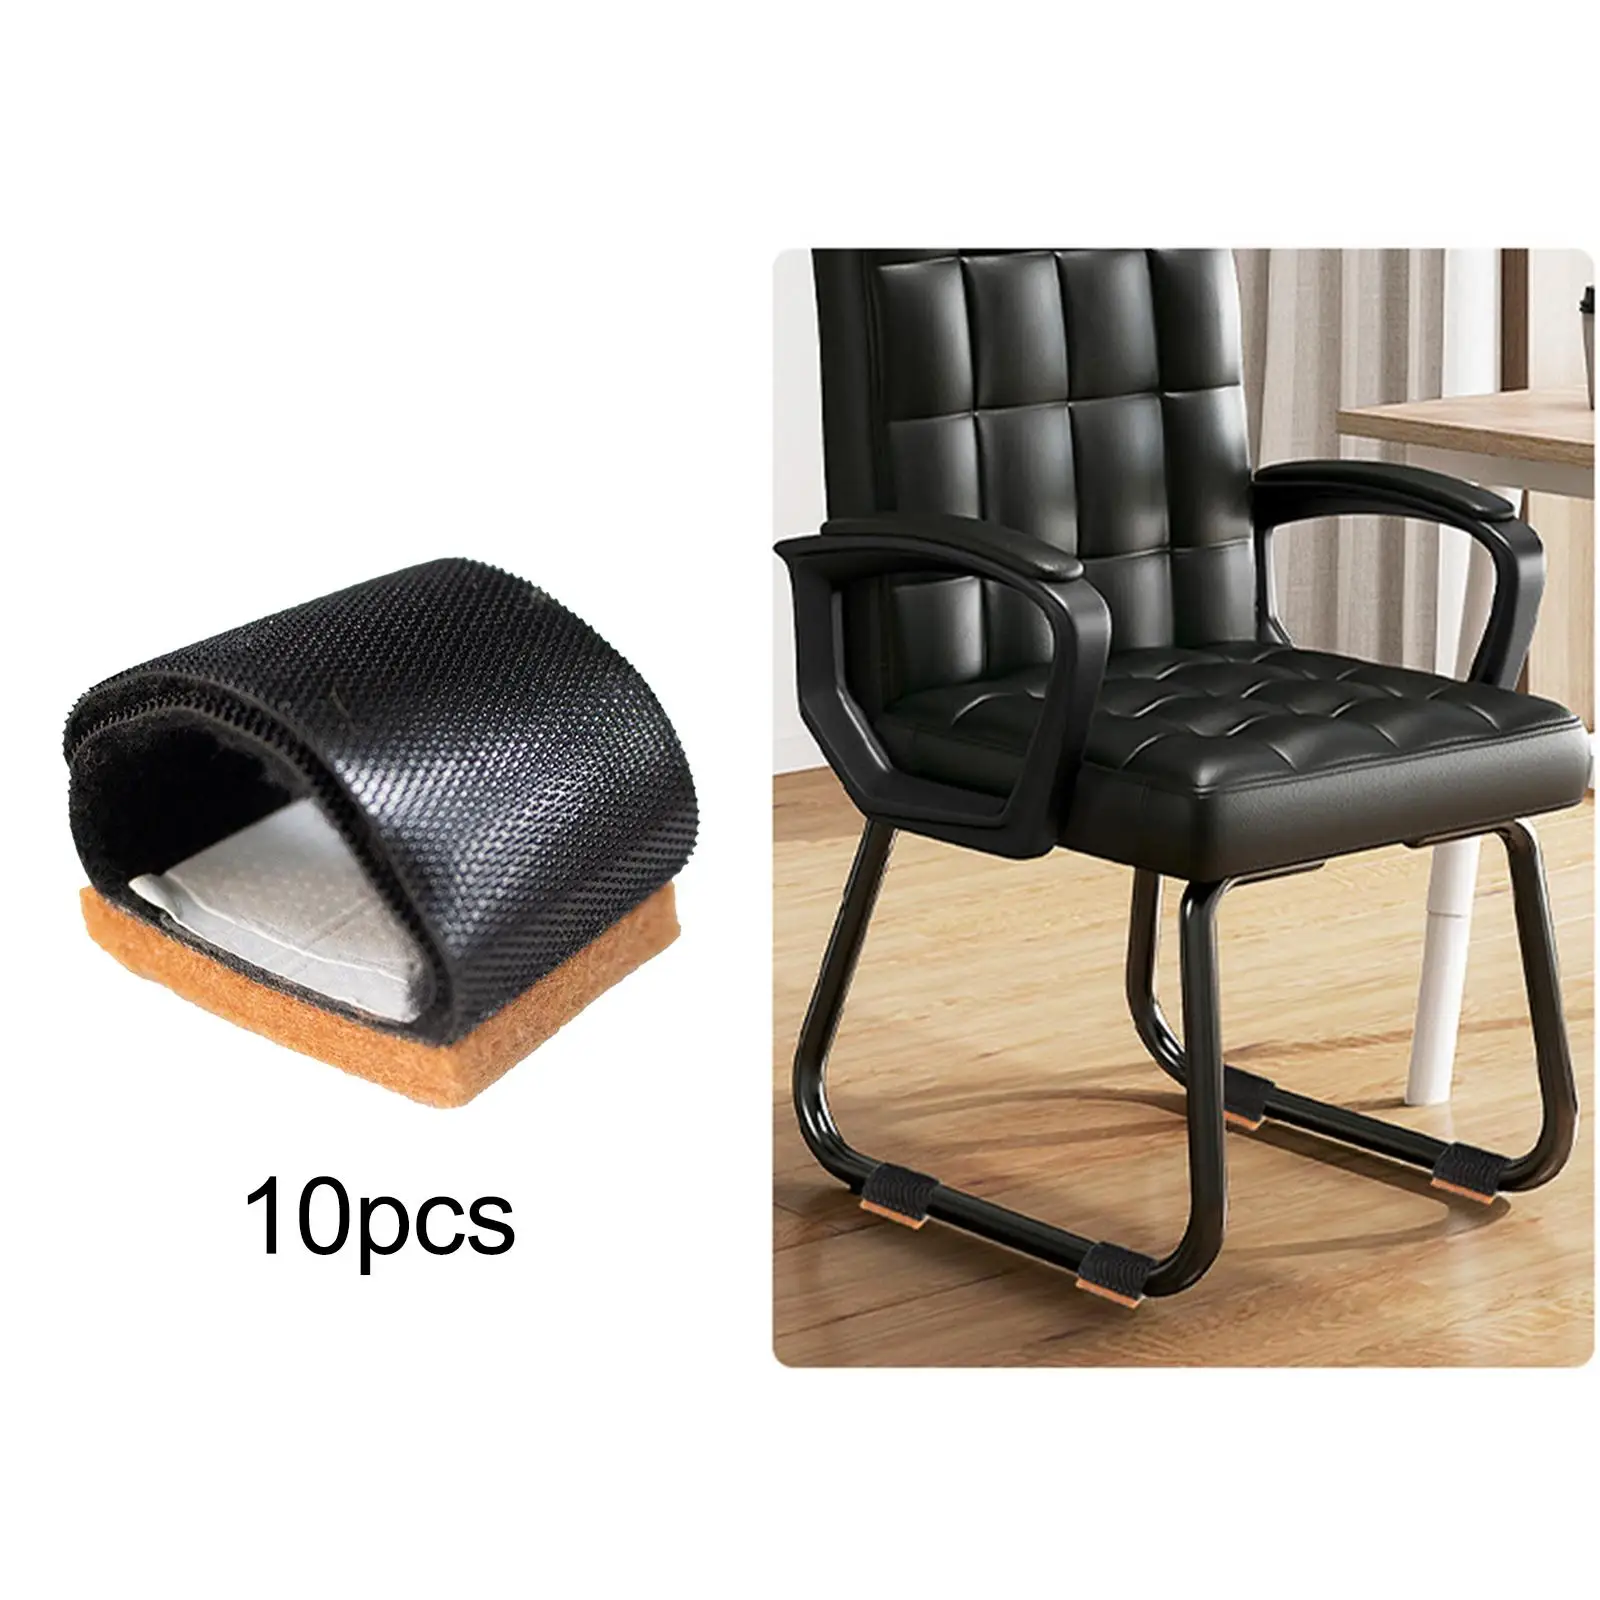 10 Pieces Rocking Chair Feet Pad Portable Lounger Feet Pad Chair Leg Caps Chair Leg Protect for Desk Shop Office Fittings